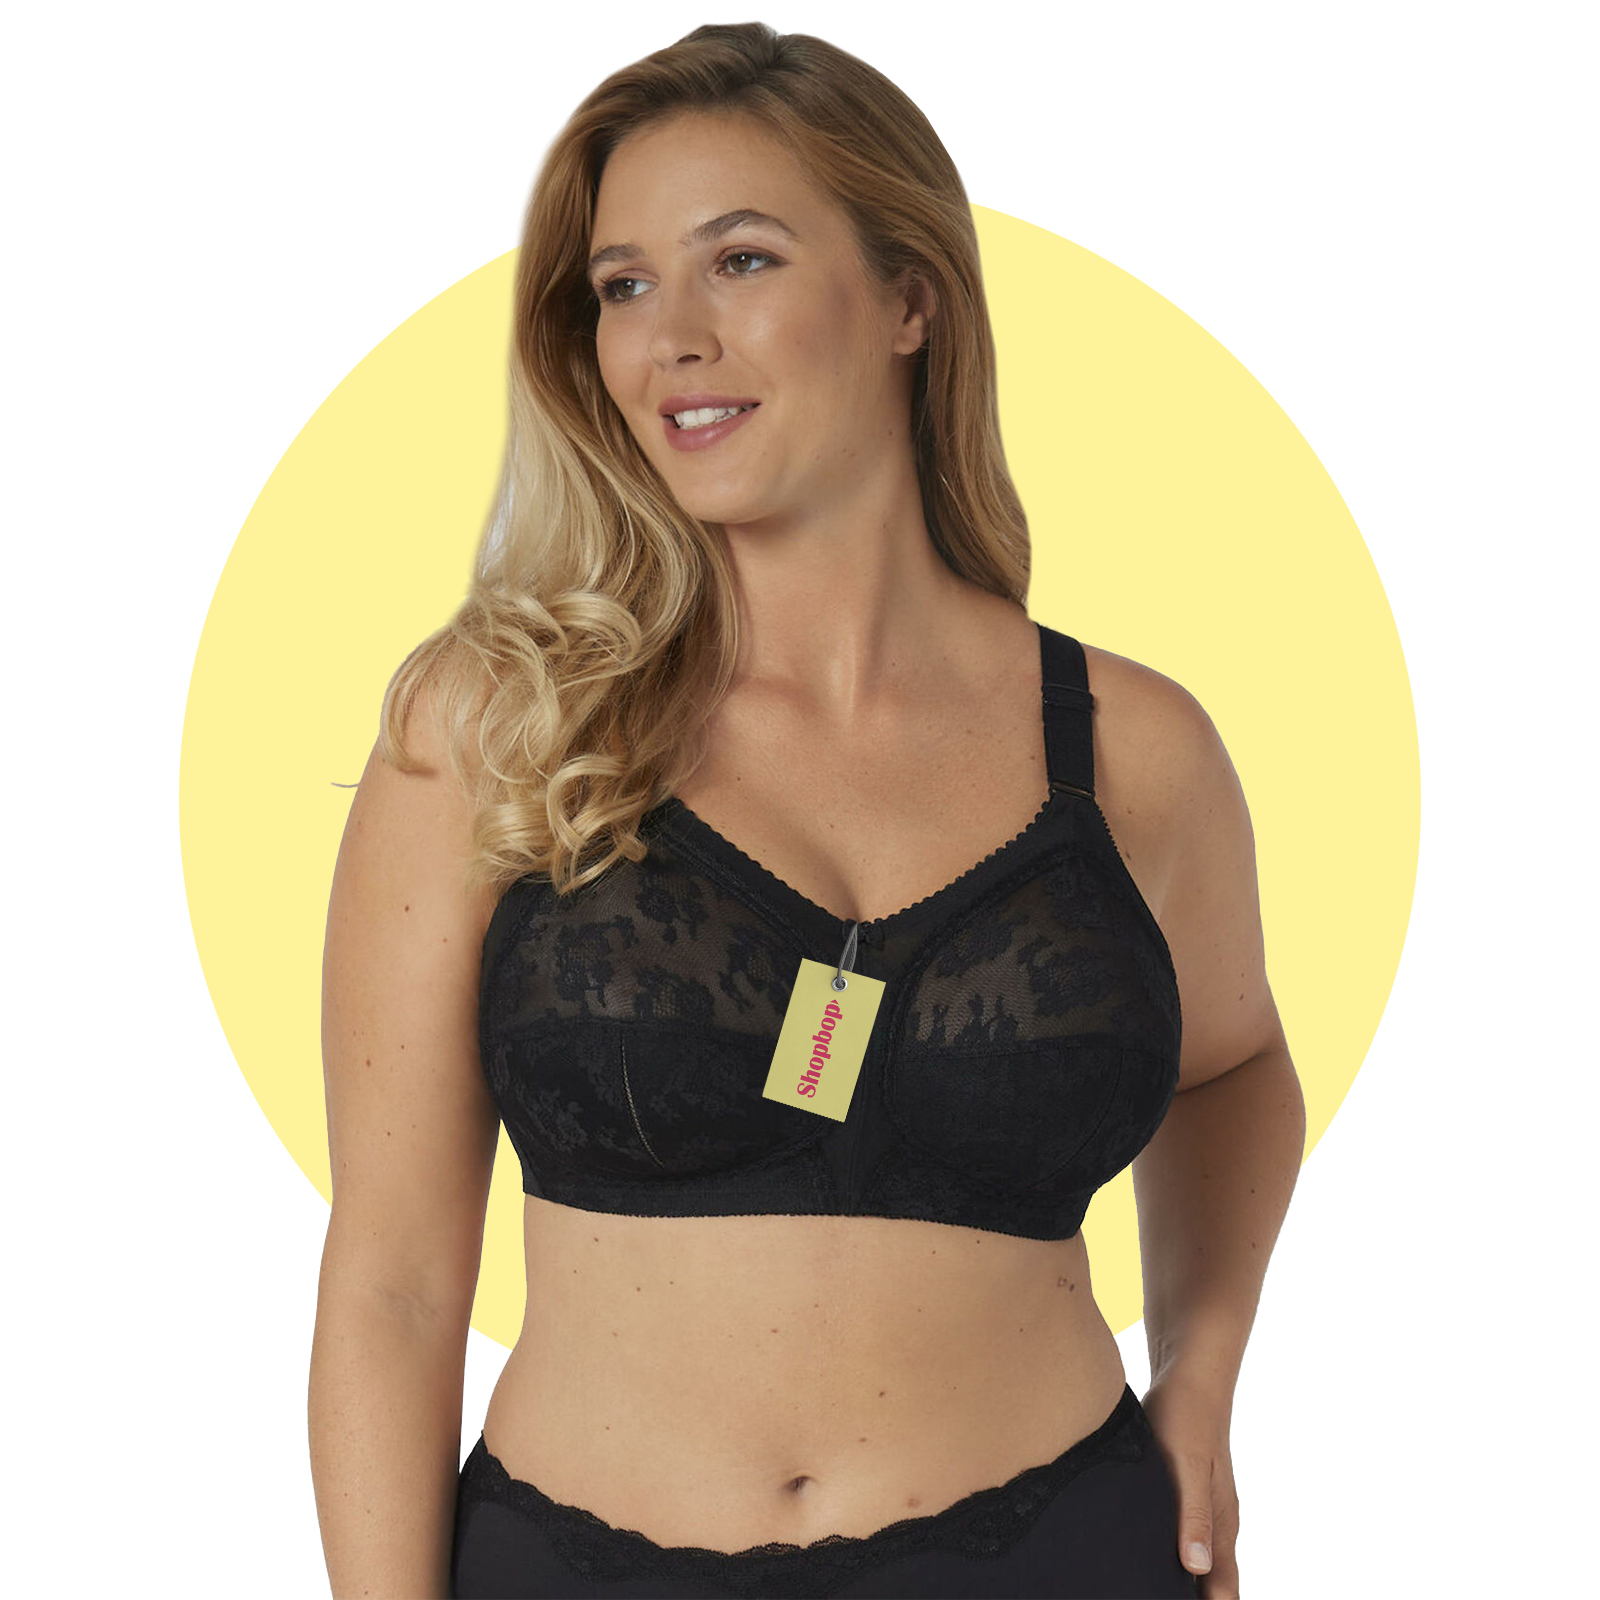 Crop Top with Integrated Support - Black